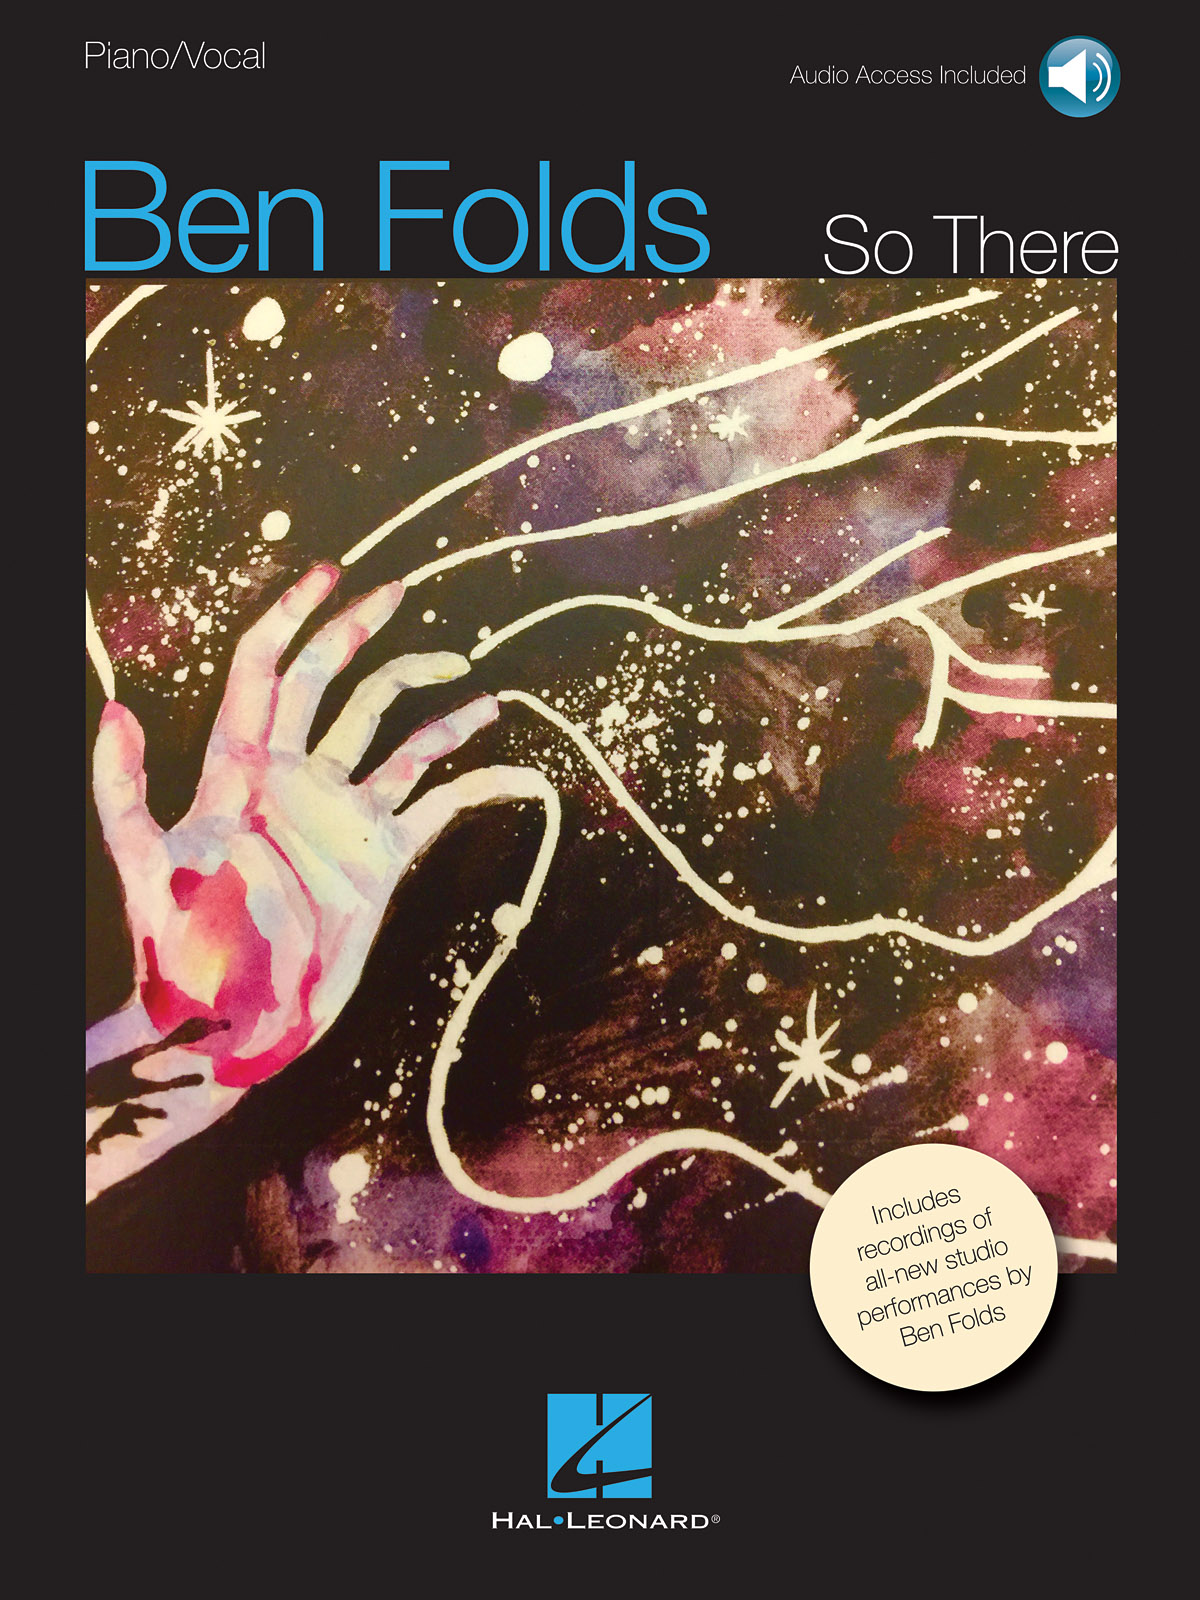 Ben Folds: Ben Folds - So There: Vocal and Piano: Album Songbook